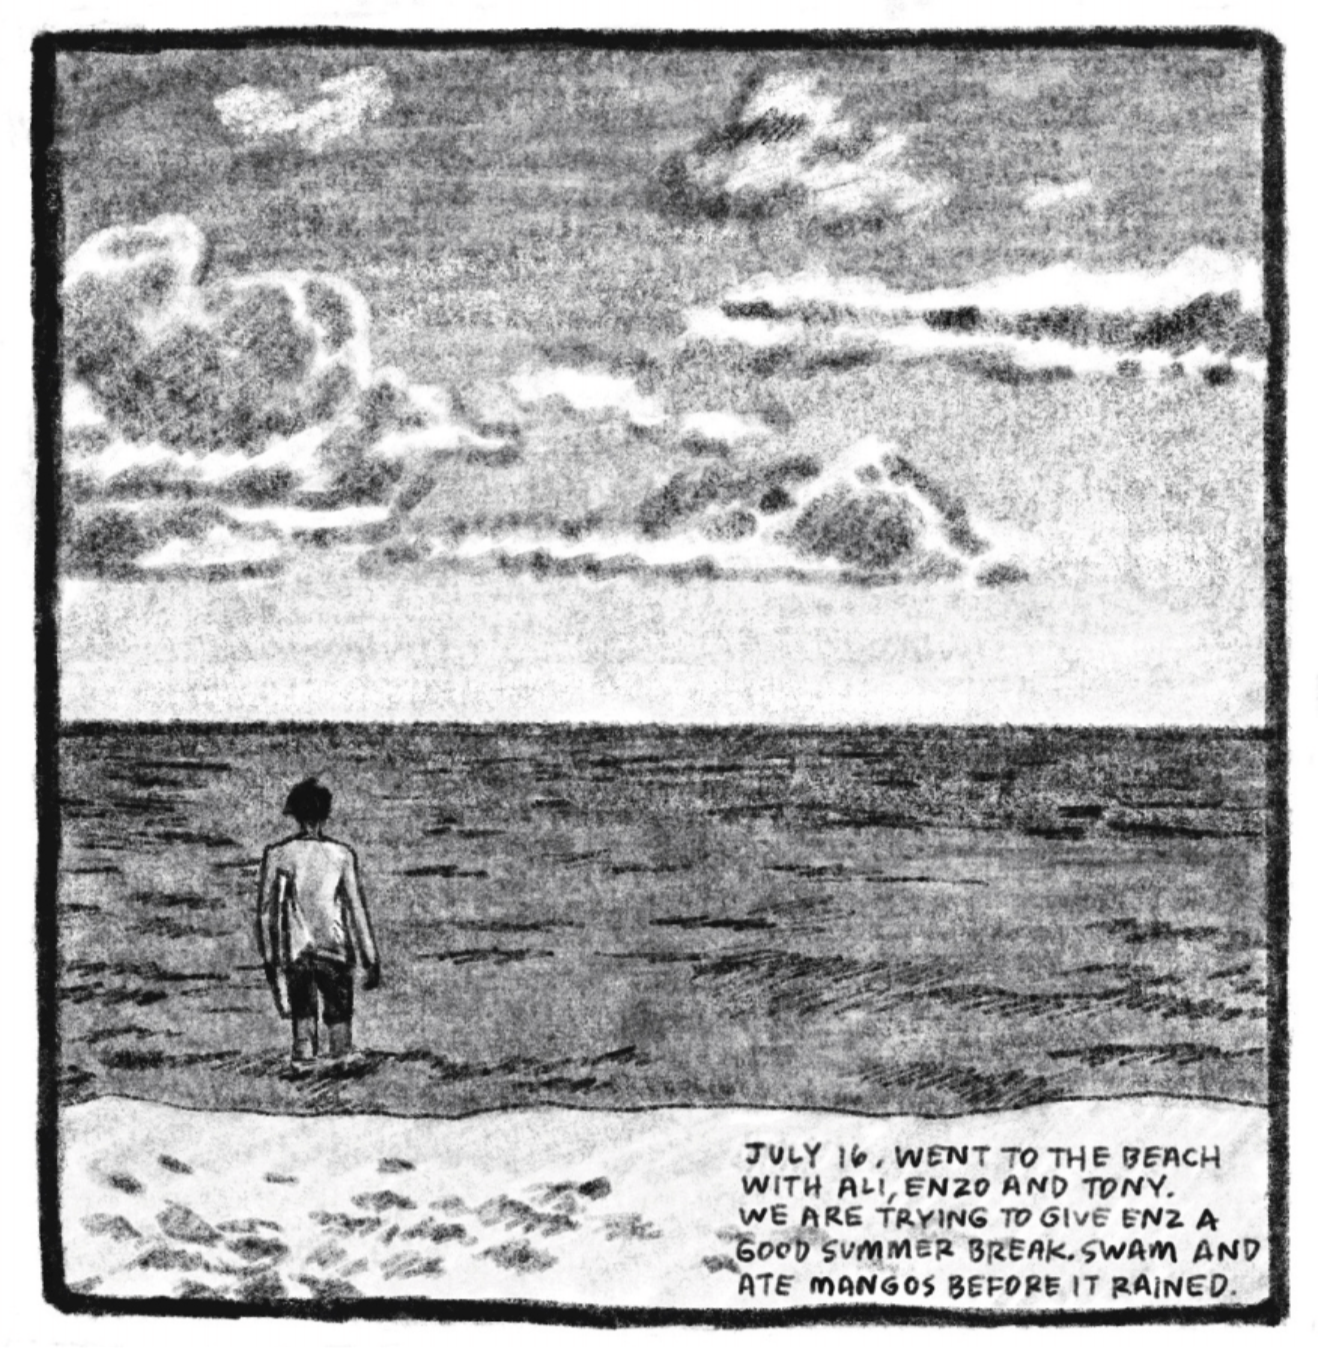 3. A beach scene viewed from the shore: Enzo stands knee-deep in the ocean, looking off into the horizon. He is wearing a long-sleeve swim shirt and swim trunks. The water looks still, with only small gentle waves; fluffy, partly gray clouds fill up half the sky. â€œJuly 16. Went to the beach with Ali, Enzo and Tony. We are trying to give Enz a good summer break. Swam and ate mangos before it rained.â€